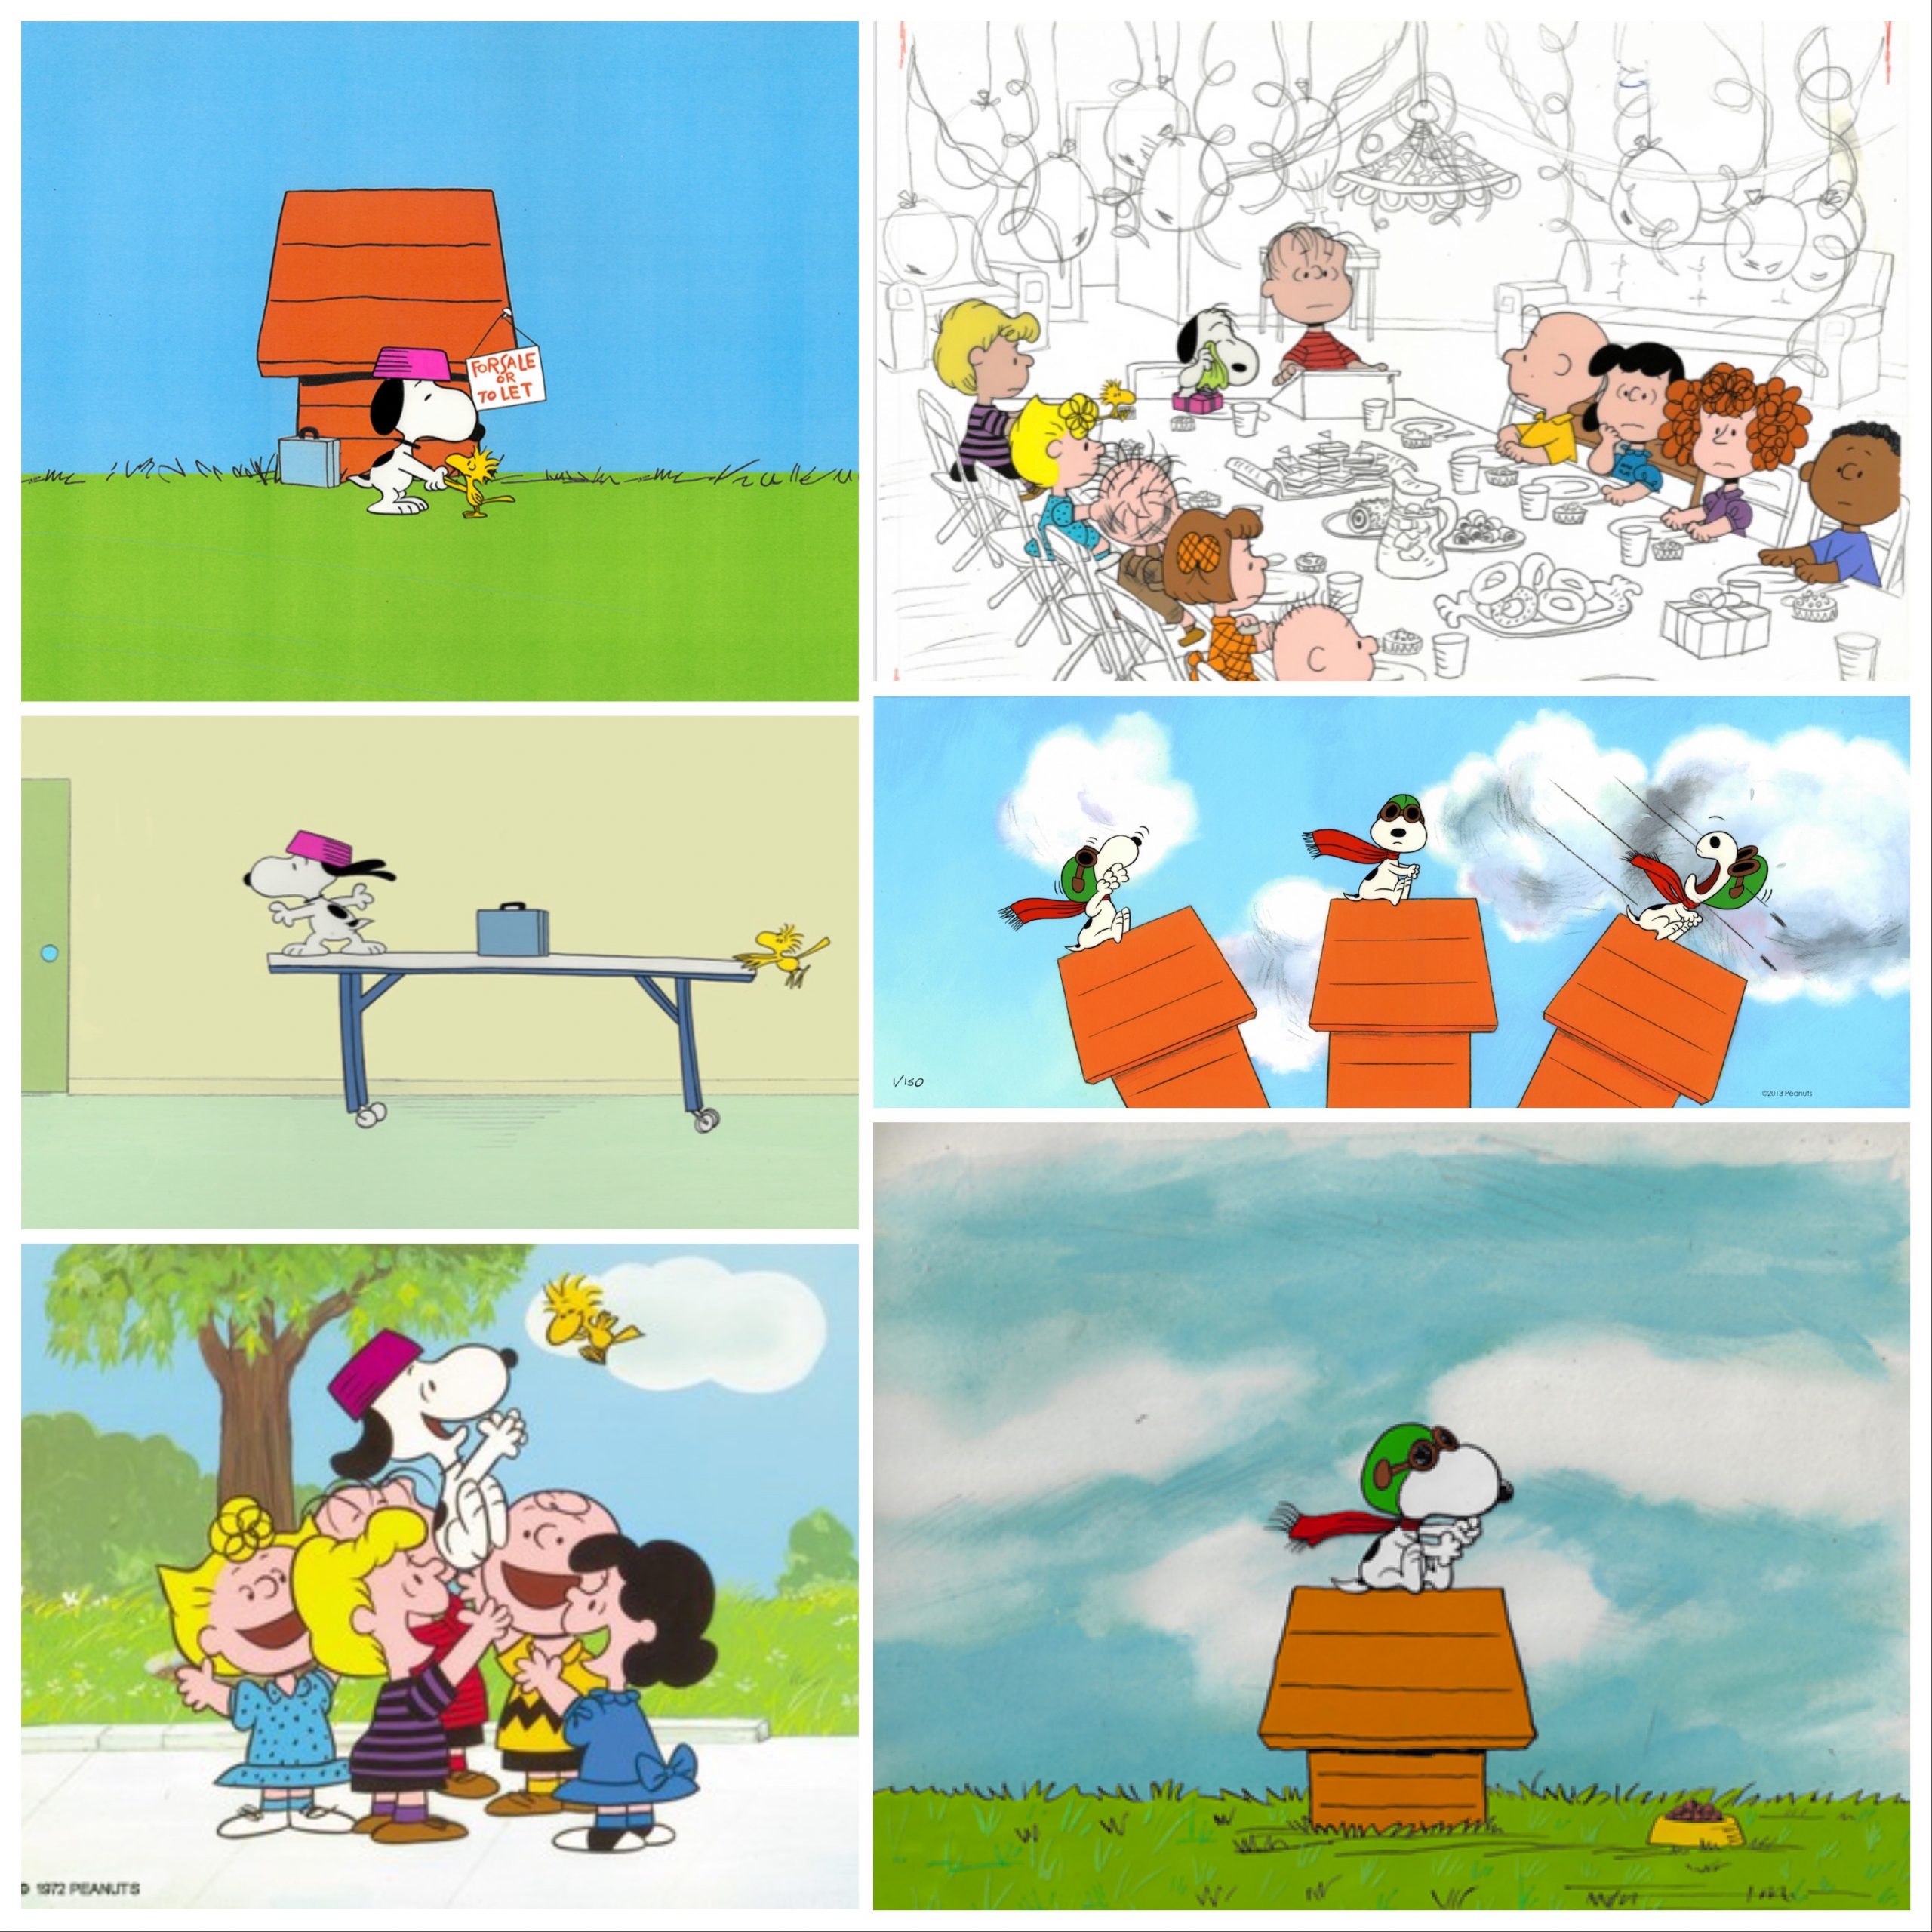 The Art of Snoopy: Peanuts cartoons Snoopy Flying Ace and Snoopy Come Home images